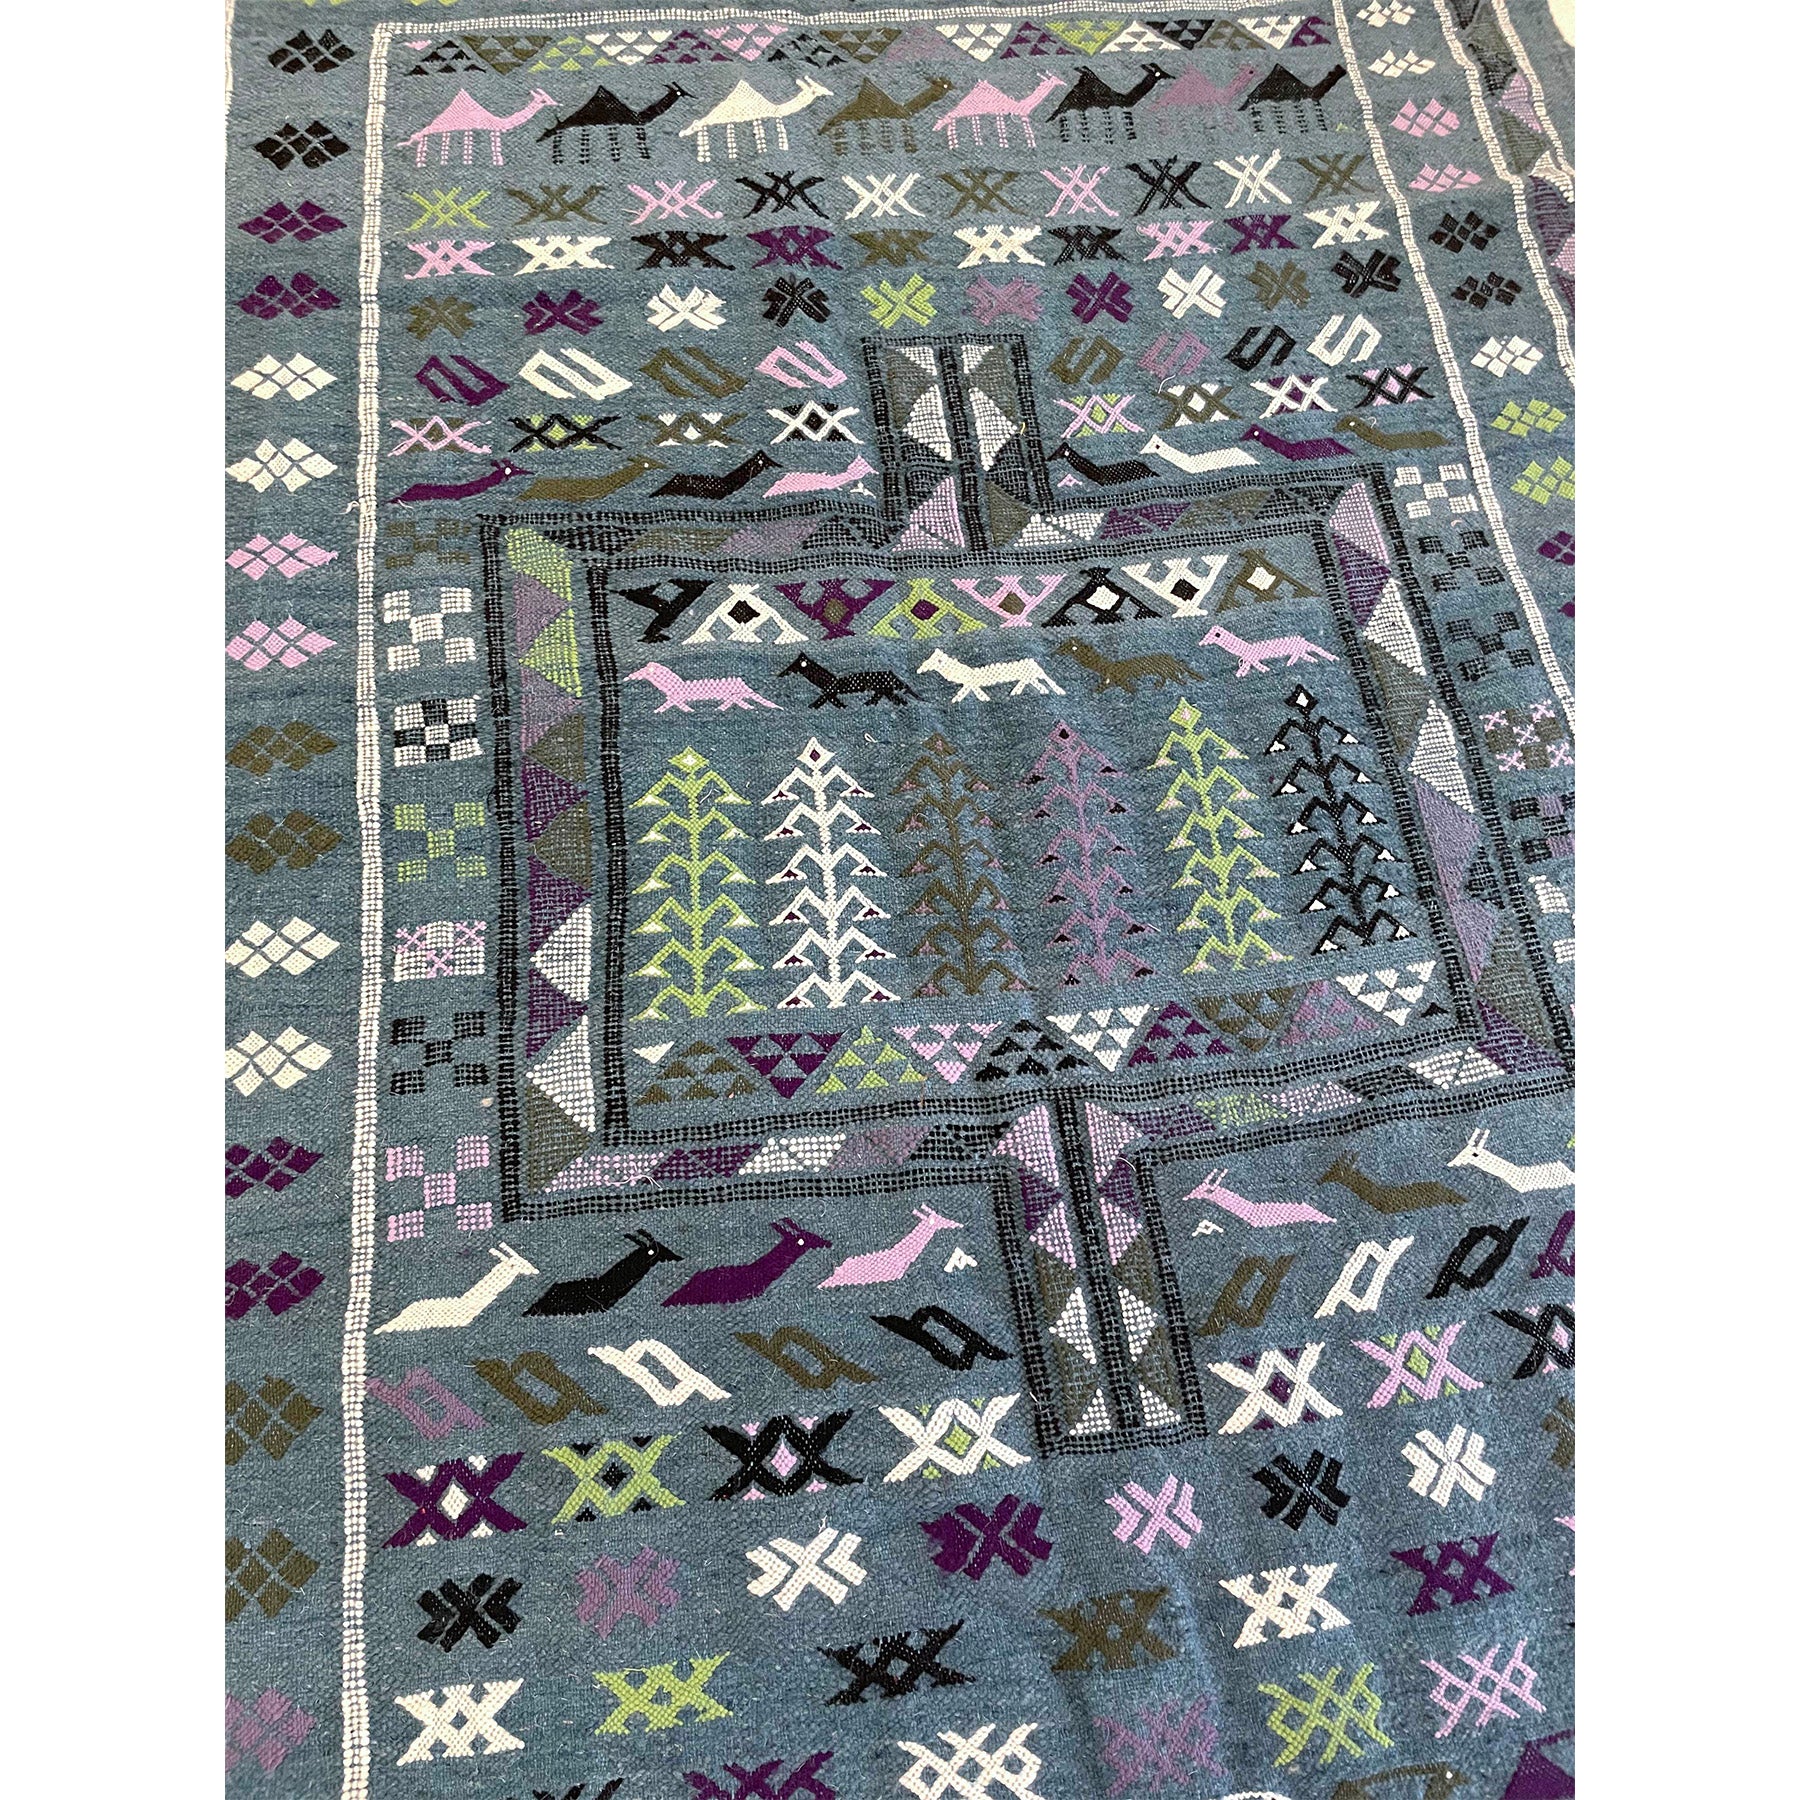 Geometric woven Moroccan flatweave kilim rug with colorful details  | Kantara Moroccan Rugs in Los Angeles